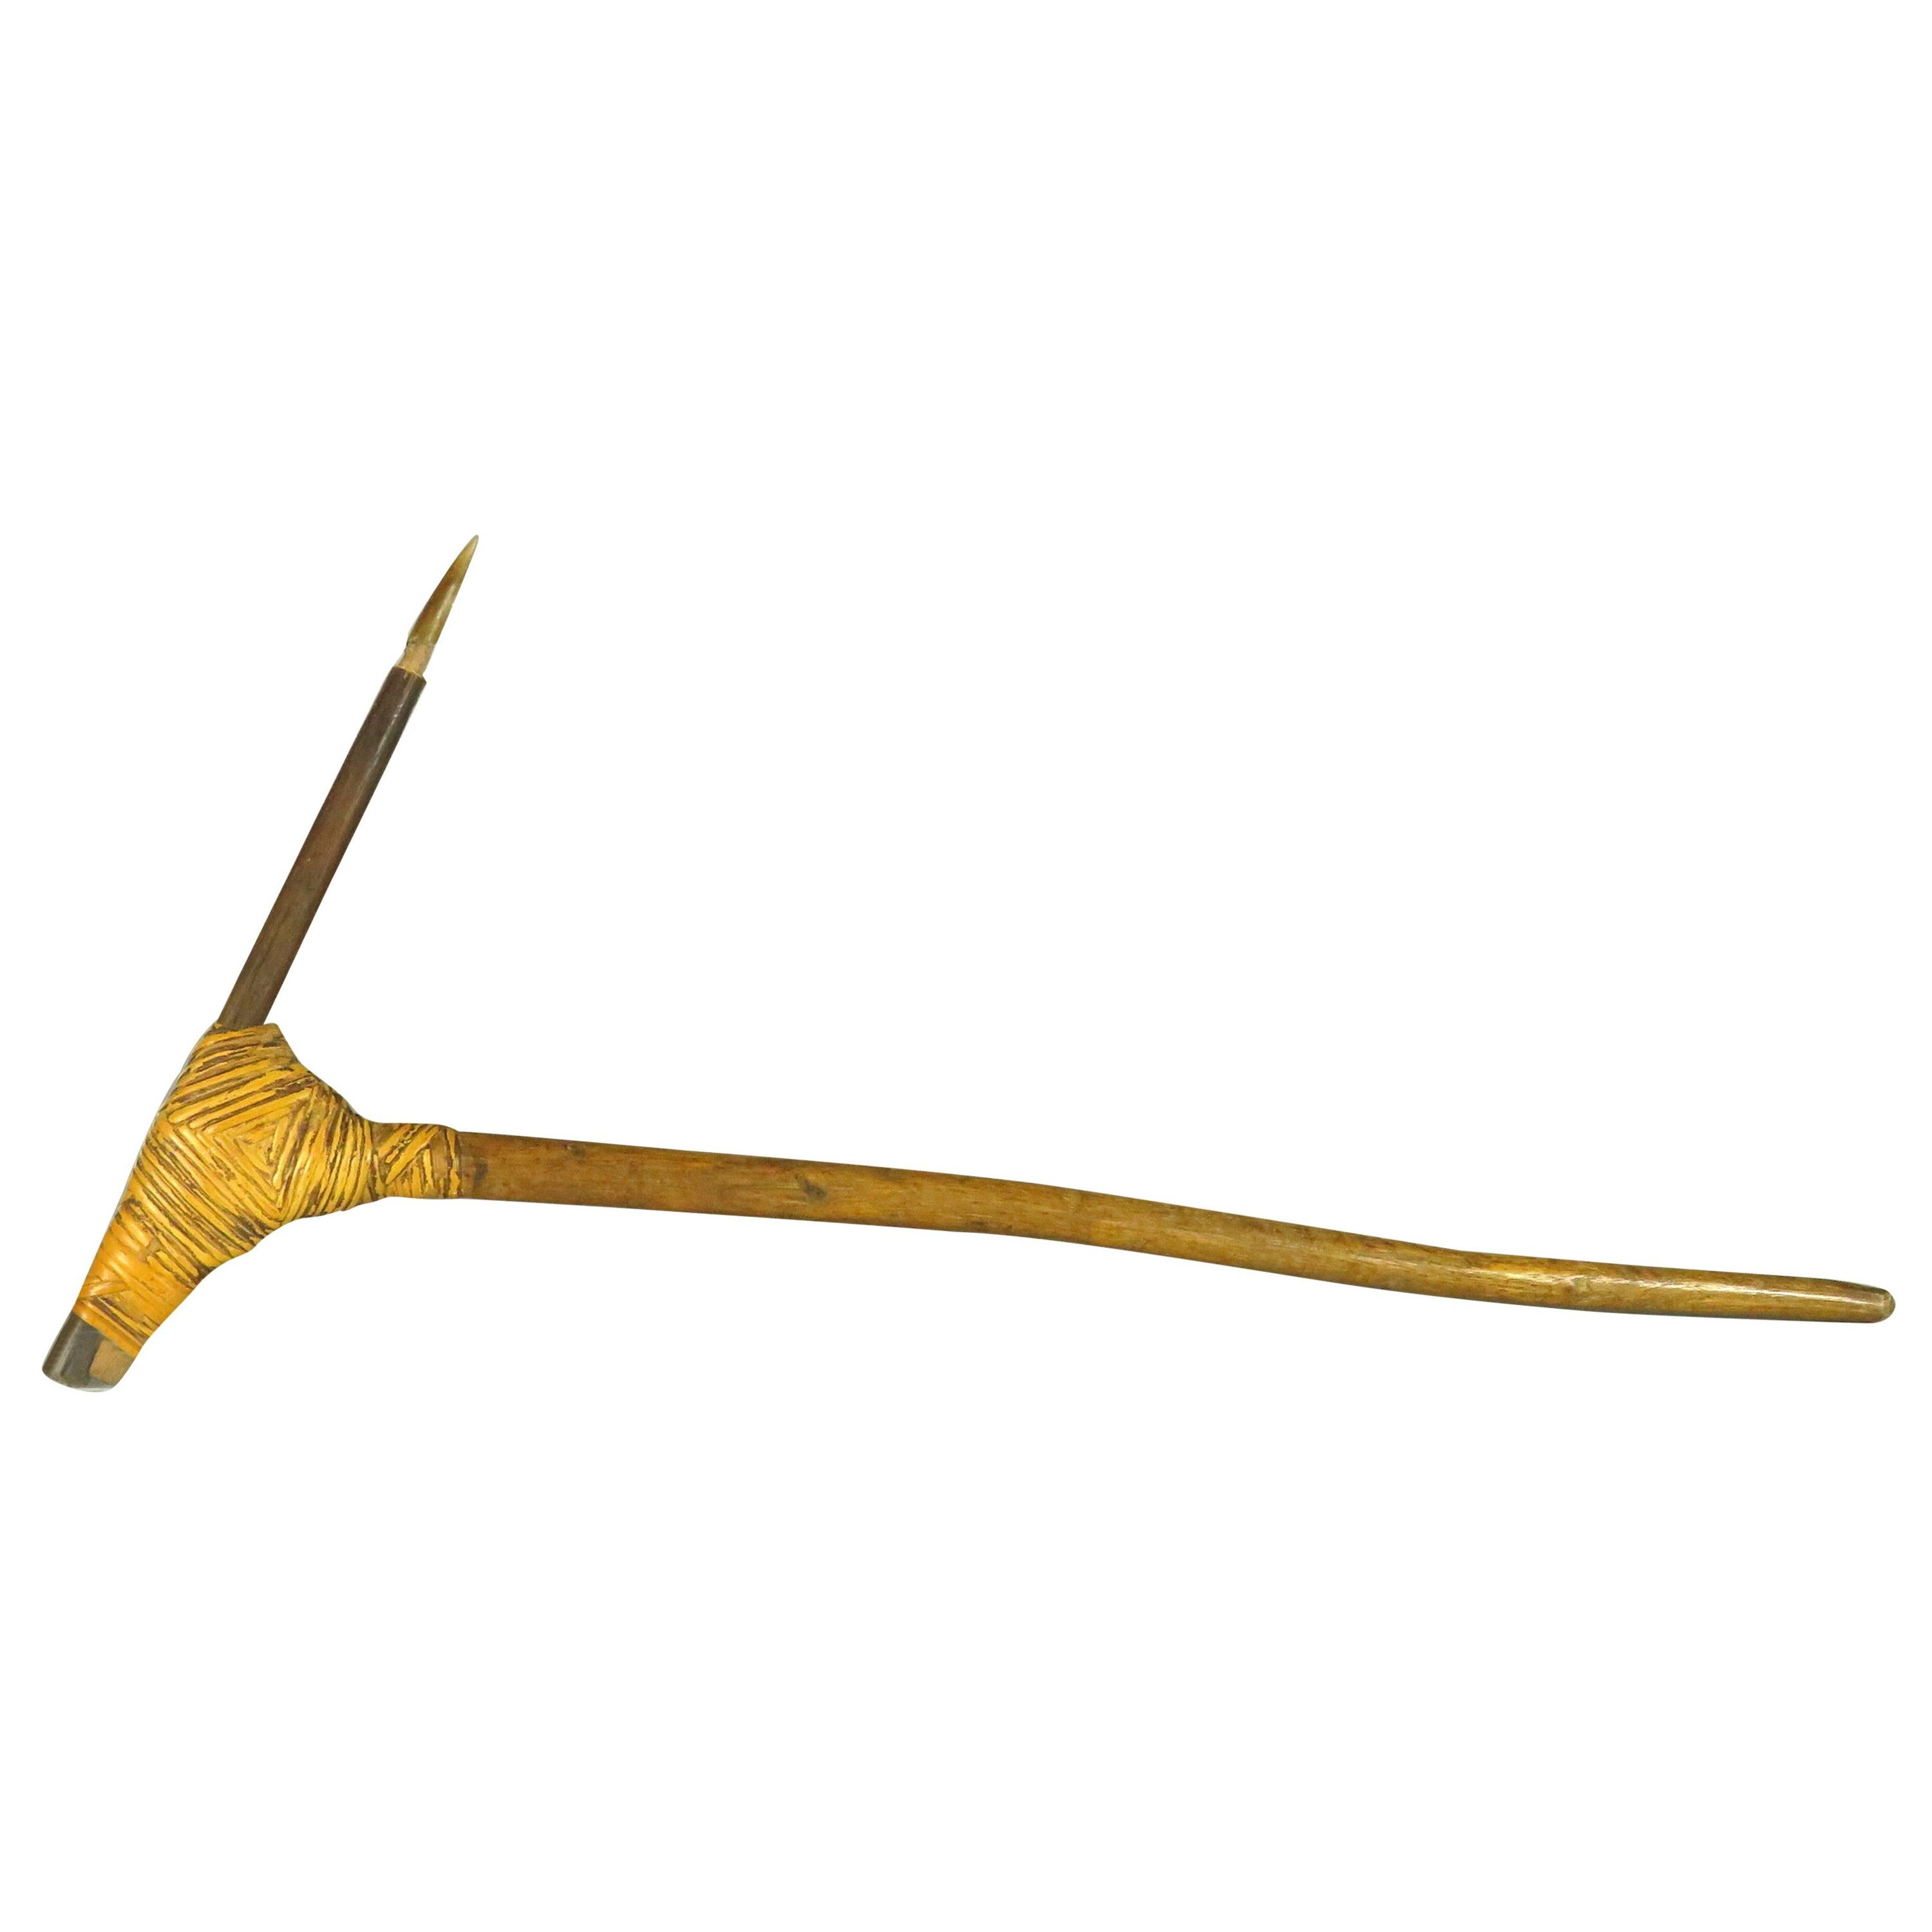 Early 20th Century Papua New Guinea Fighting Pick, Lowland Rainforest